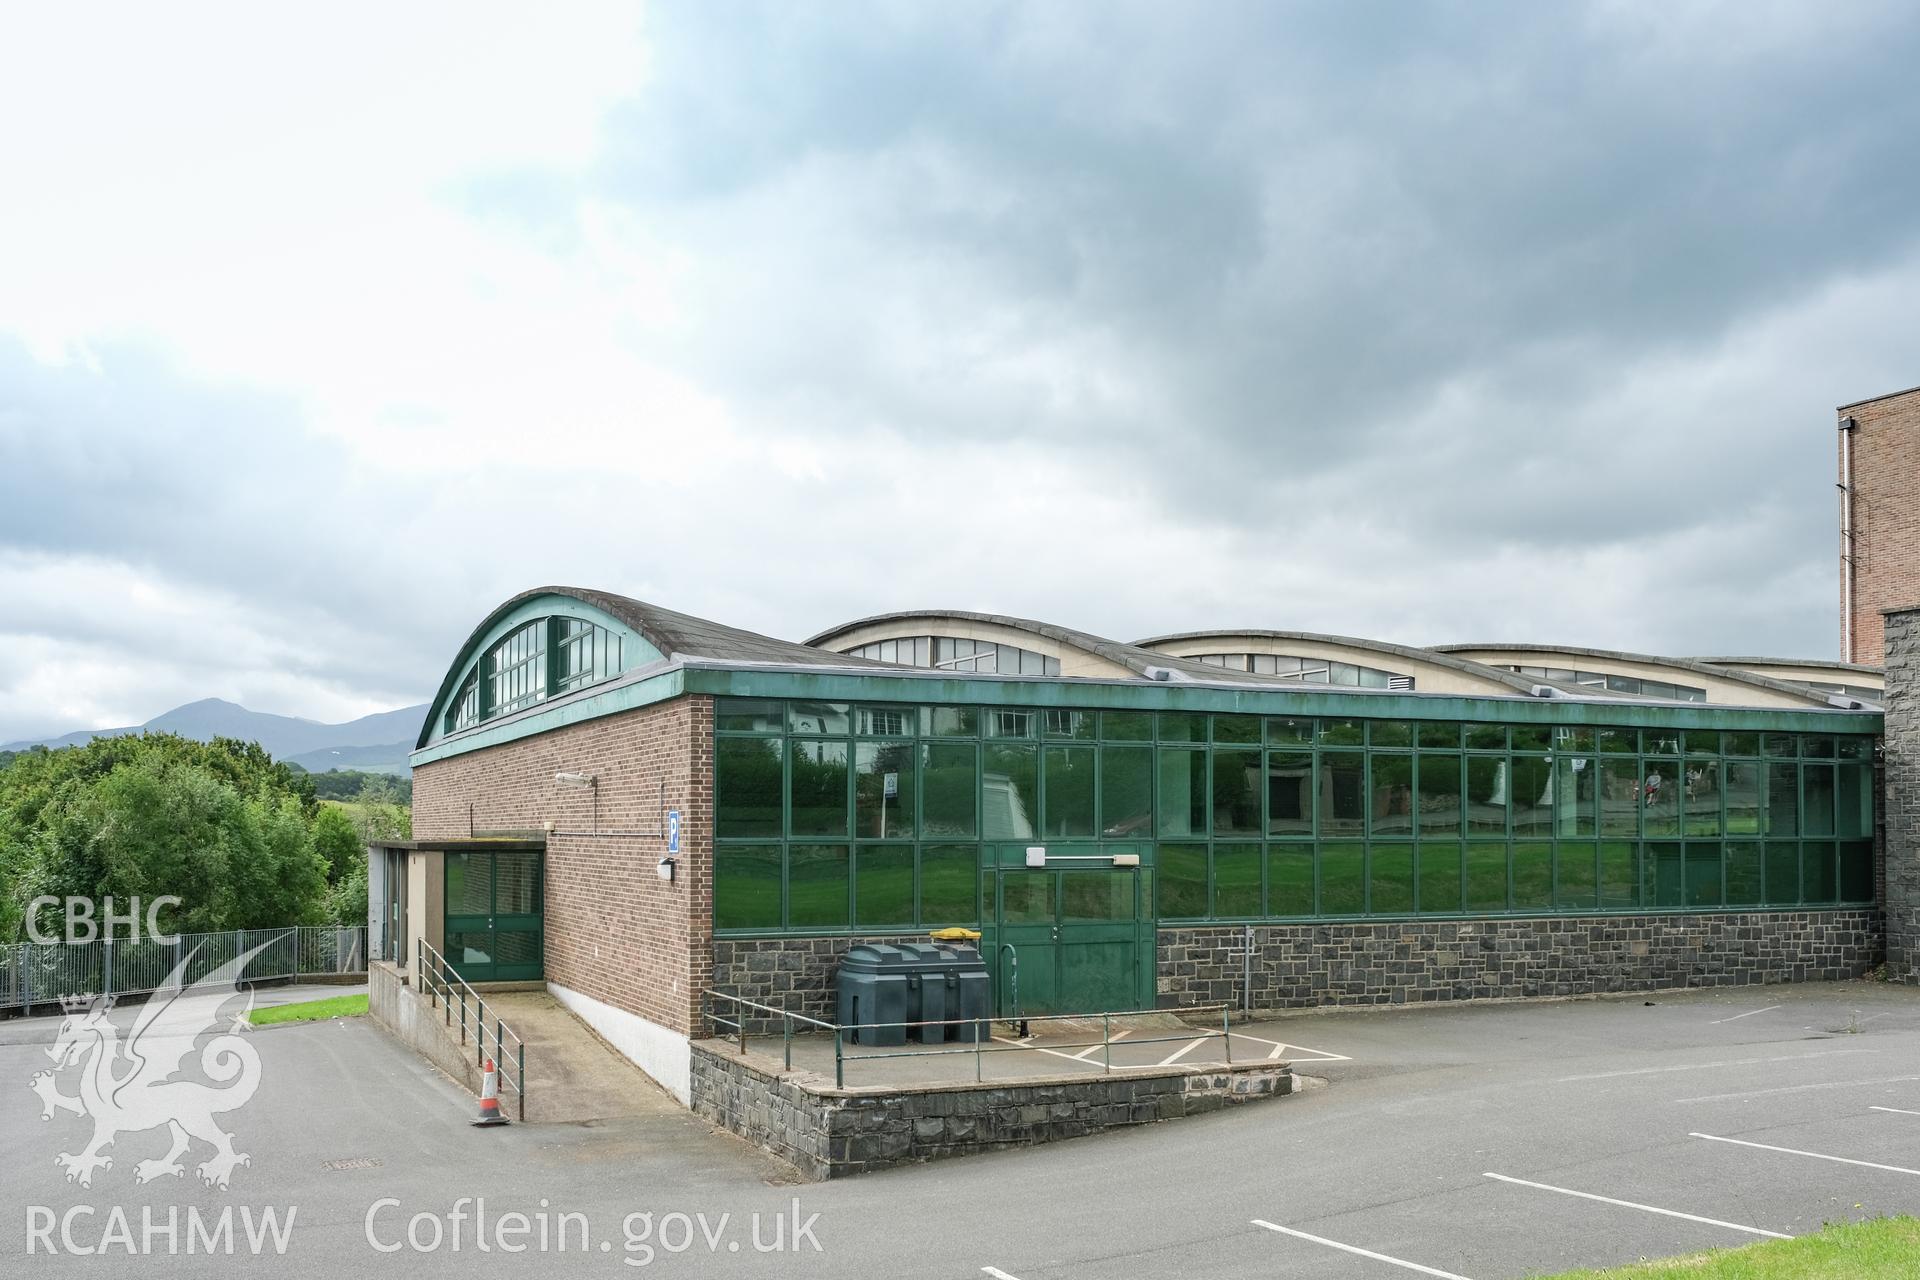 Digital colour photograph showing exterior view of Caernarfonshire Technical College, Ffriddoedd Road, Bangor. Photographed by Dilys Morgan and donated by Wyn Thomas of Grwp Llandrillo-Menai Further Education College, 2019.